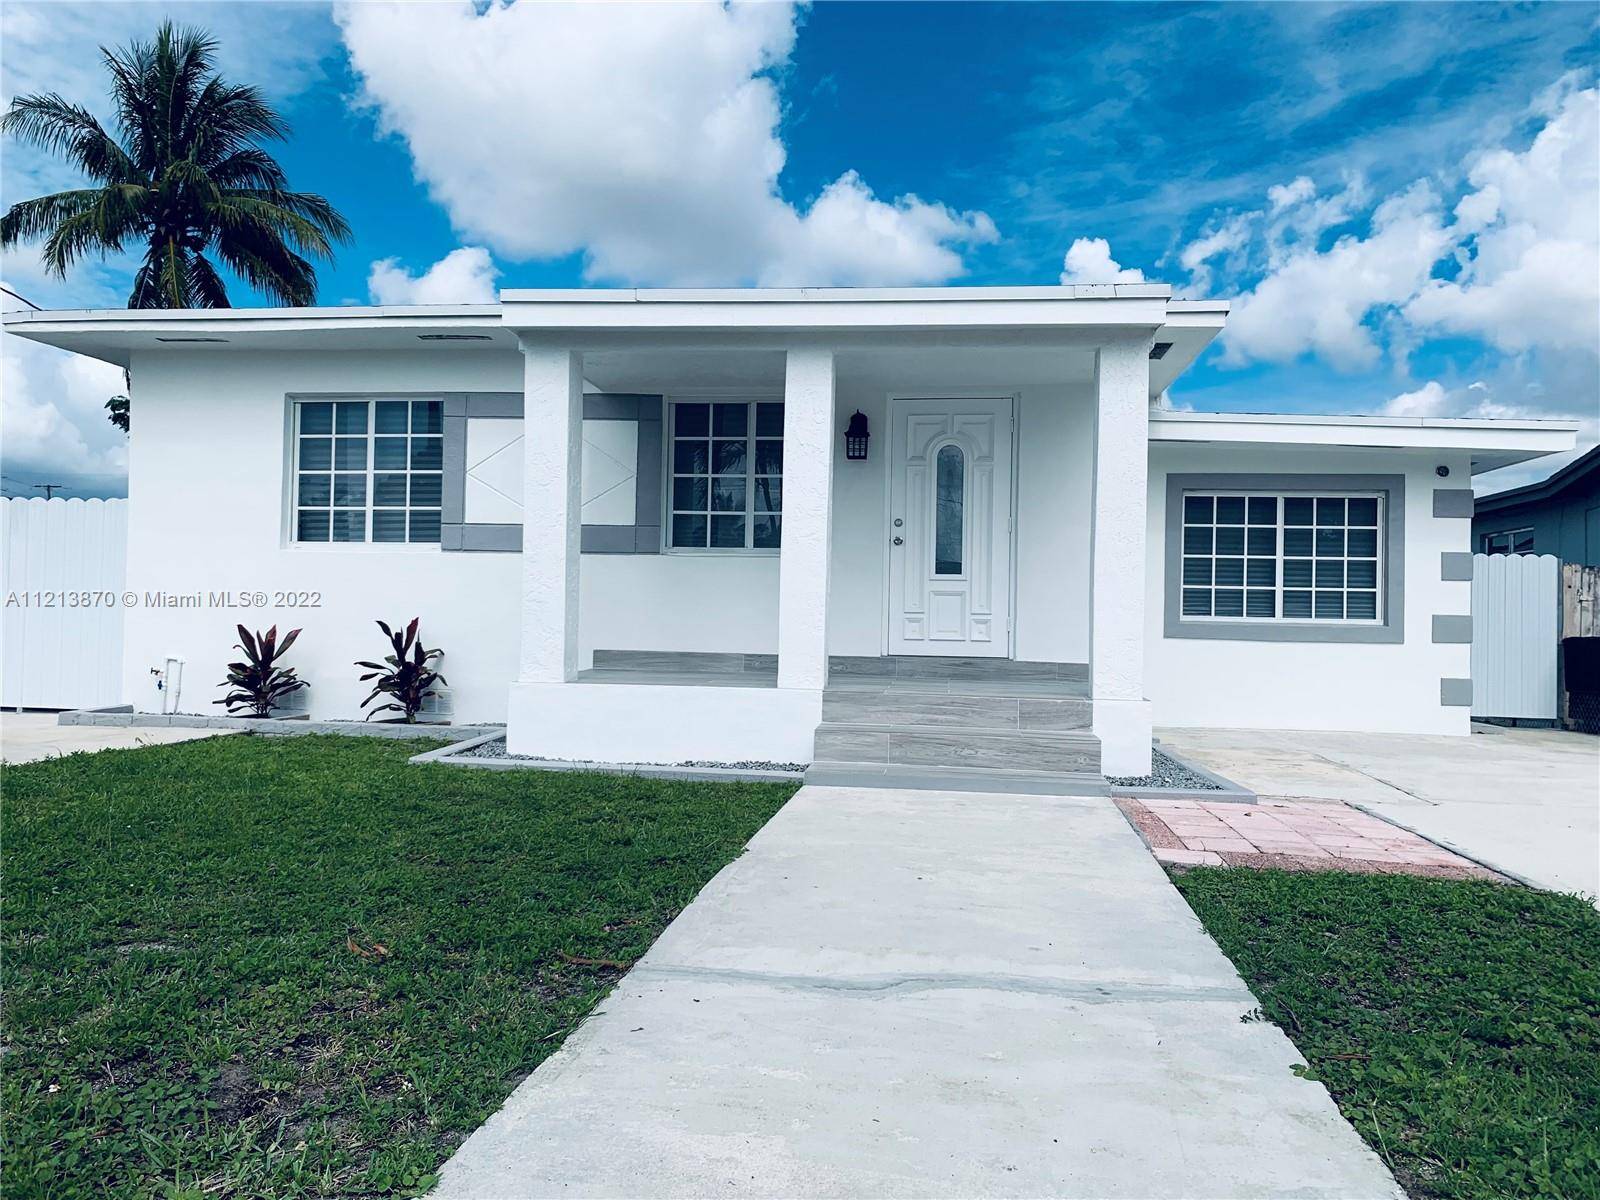 Remodeled Single Family Home located in Hialeah.